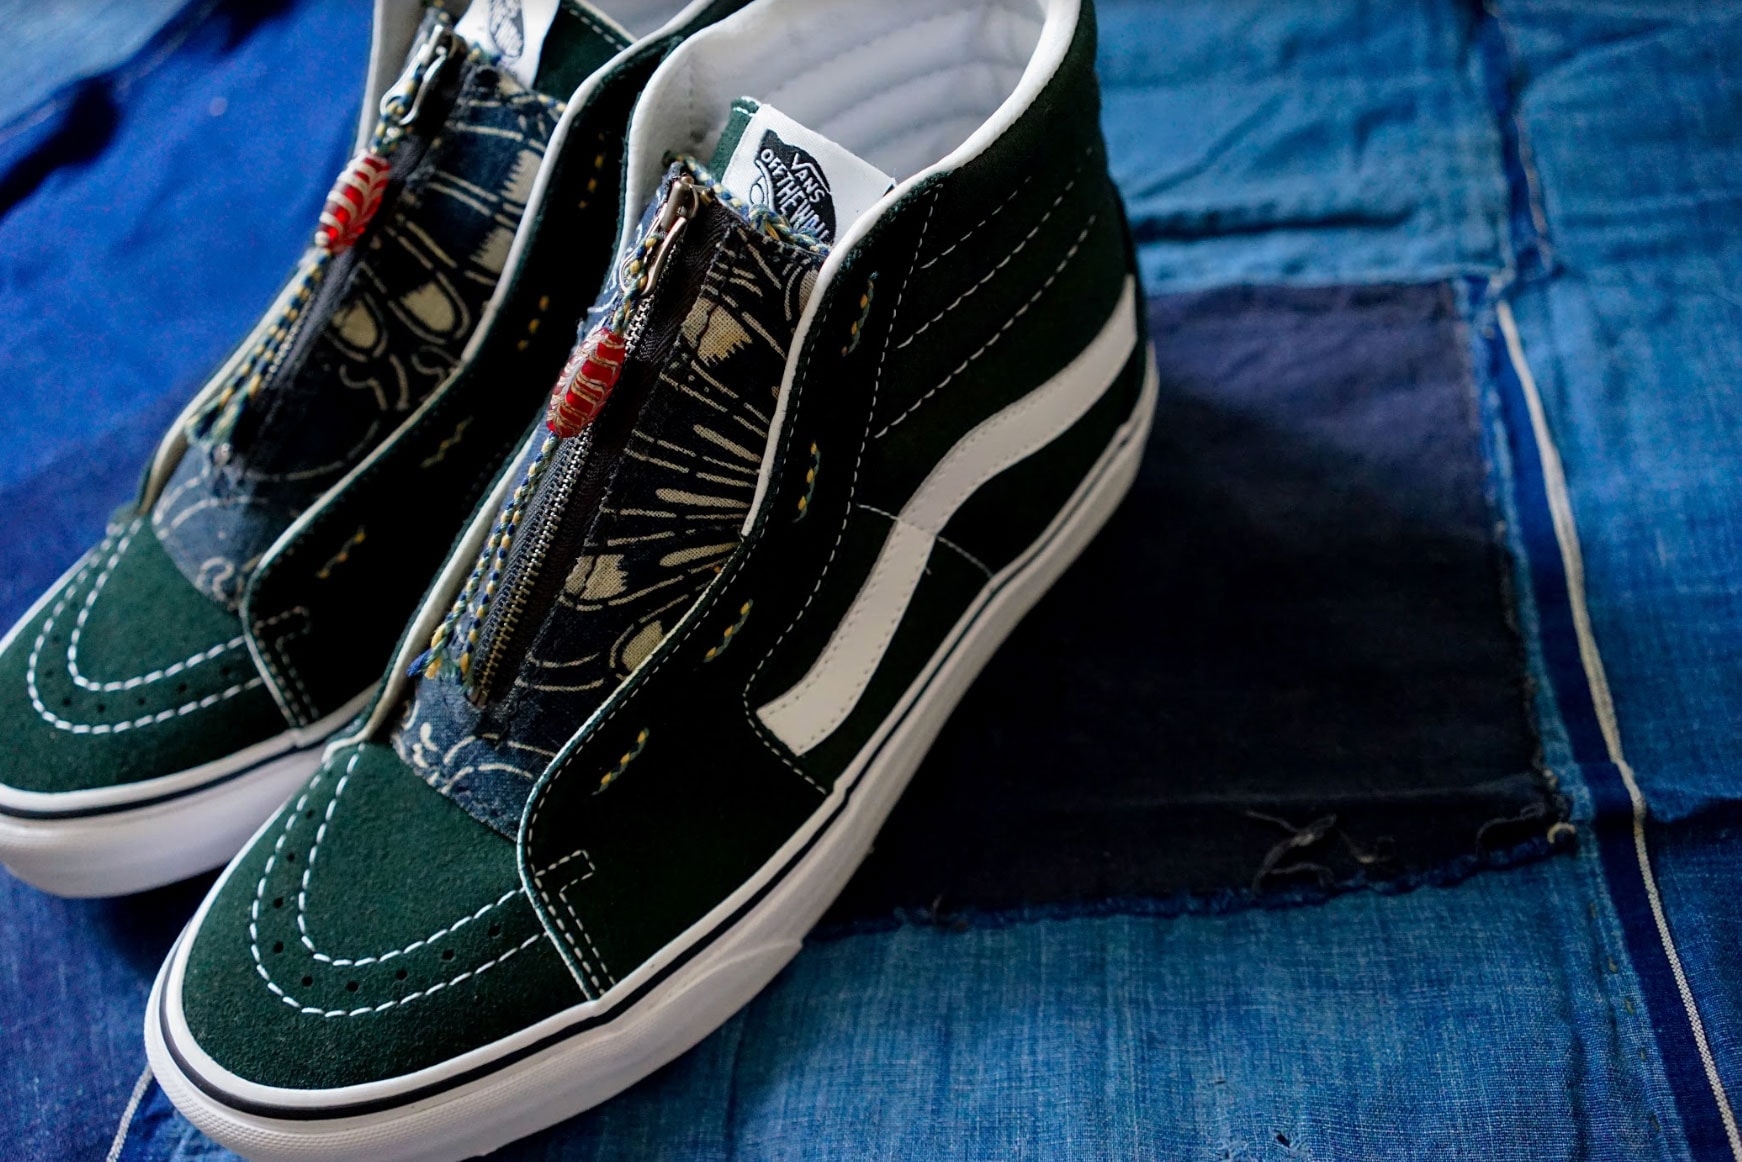 Simple Union 攜手 The Flying Hawk Studio 打造 Vans「Series of Craft And Cultural」客製系列